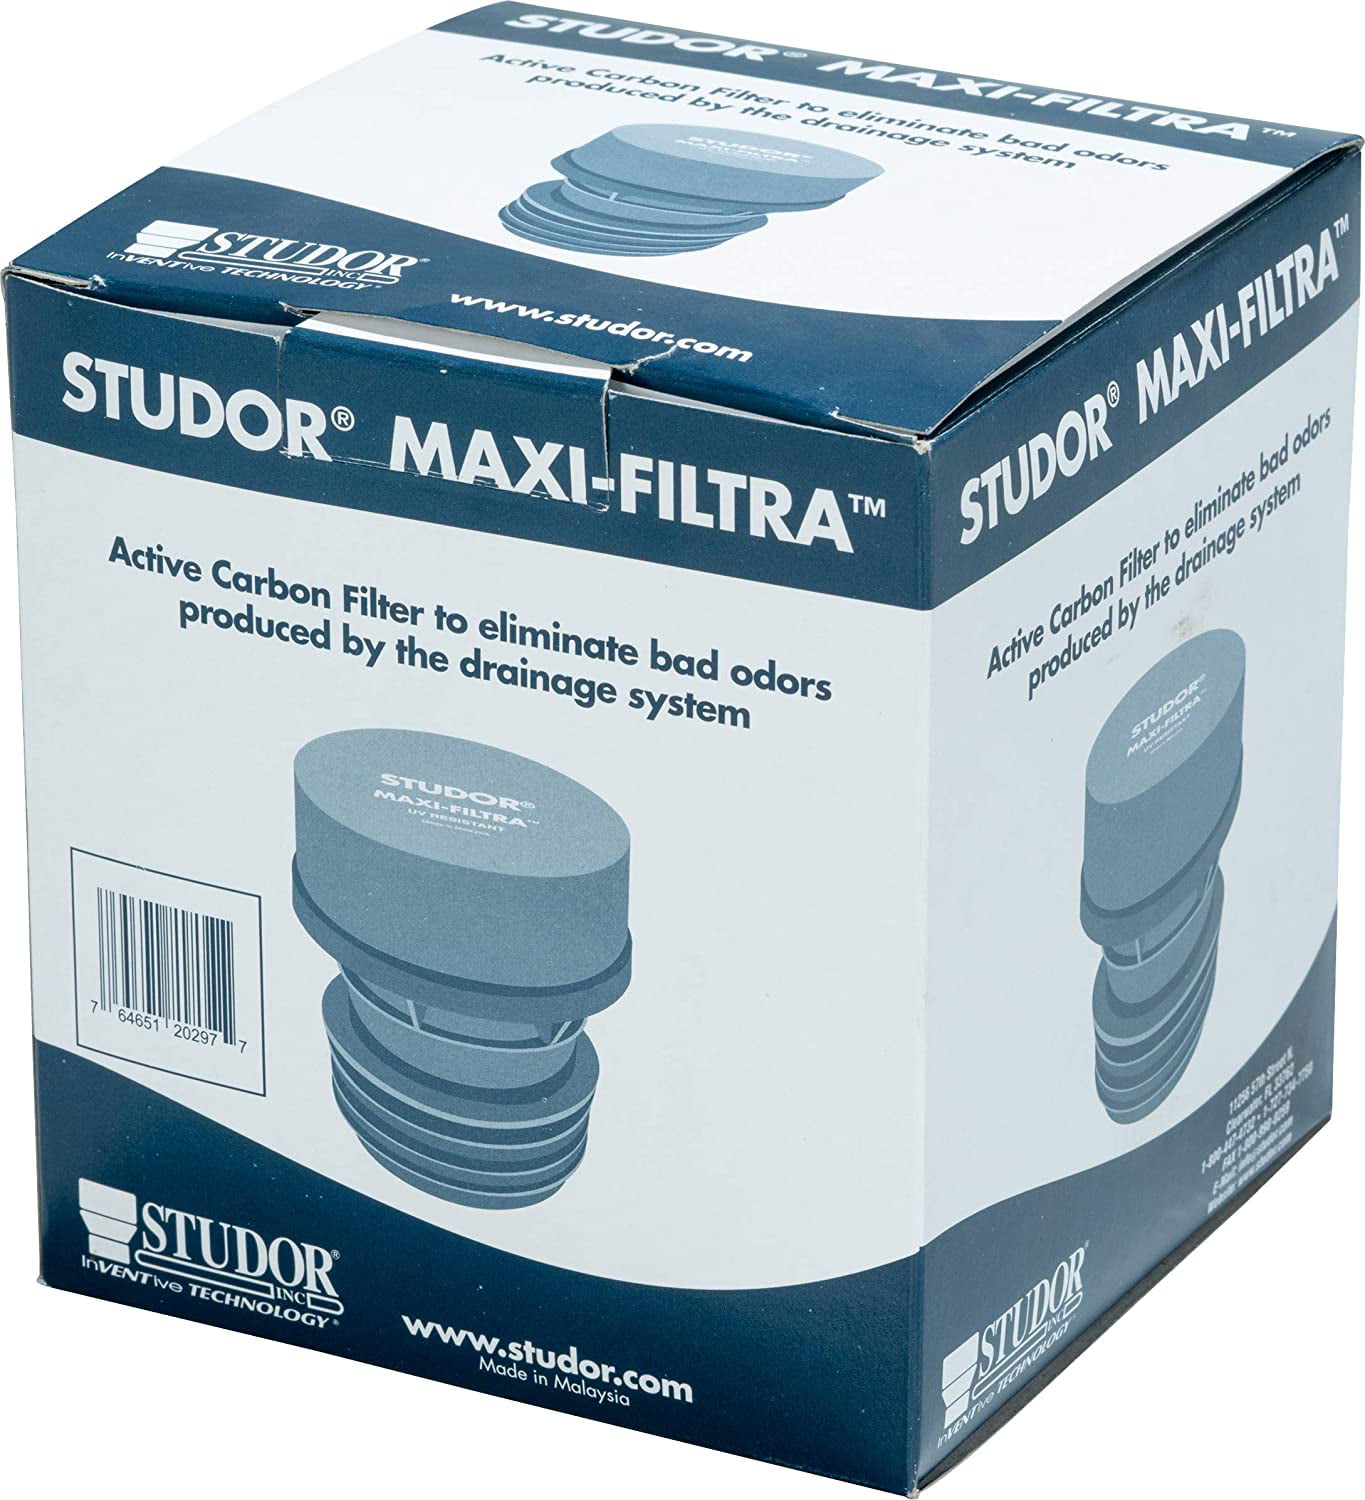 Studor Maxi-Filtra Two Way Carbon Filter Vent For Septic Tank Drain Sewage Smell 